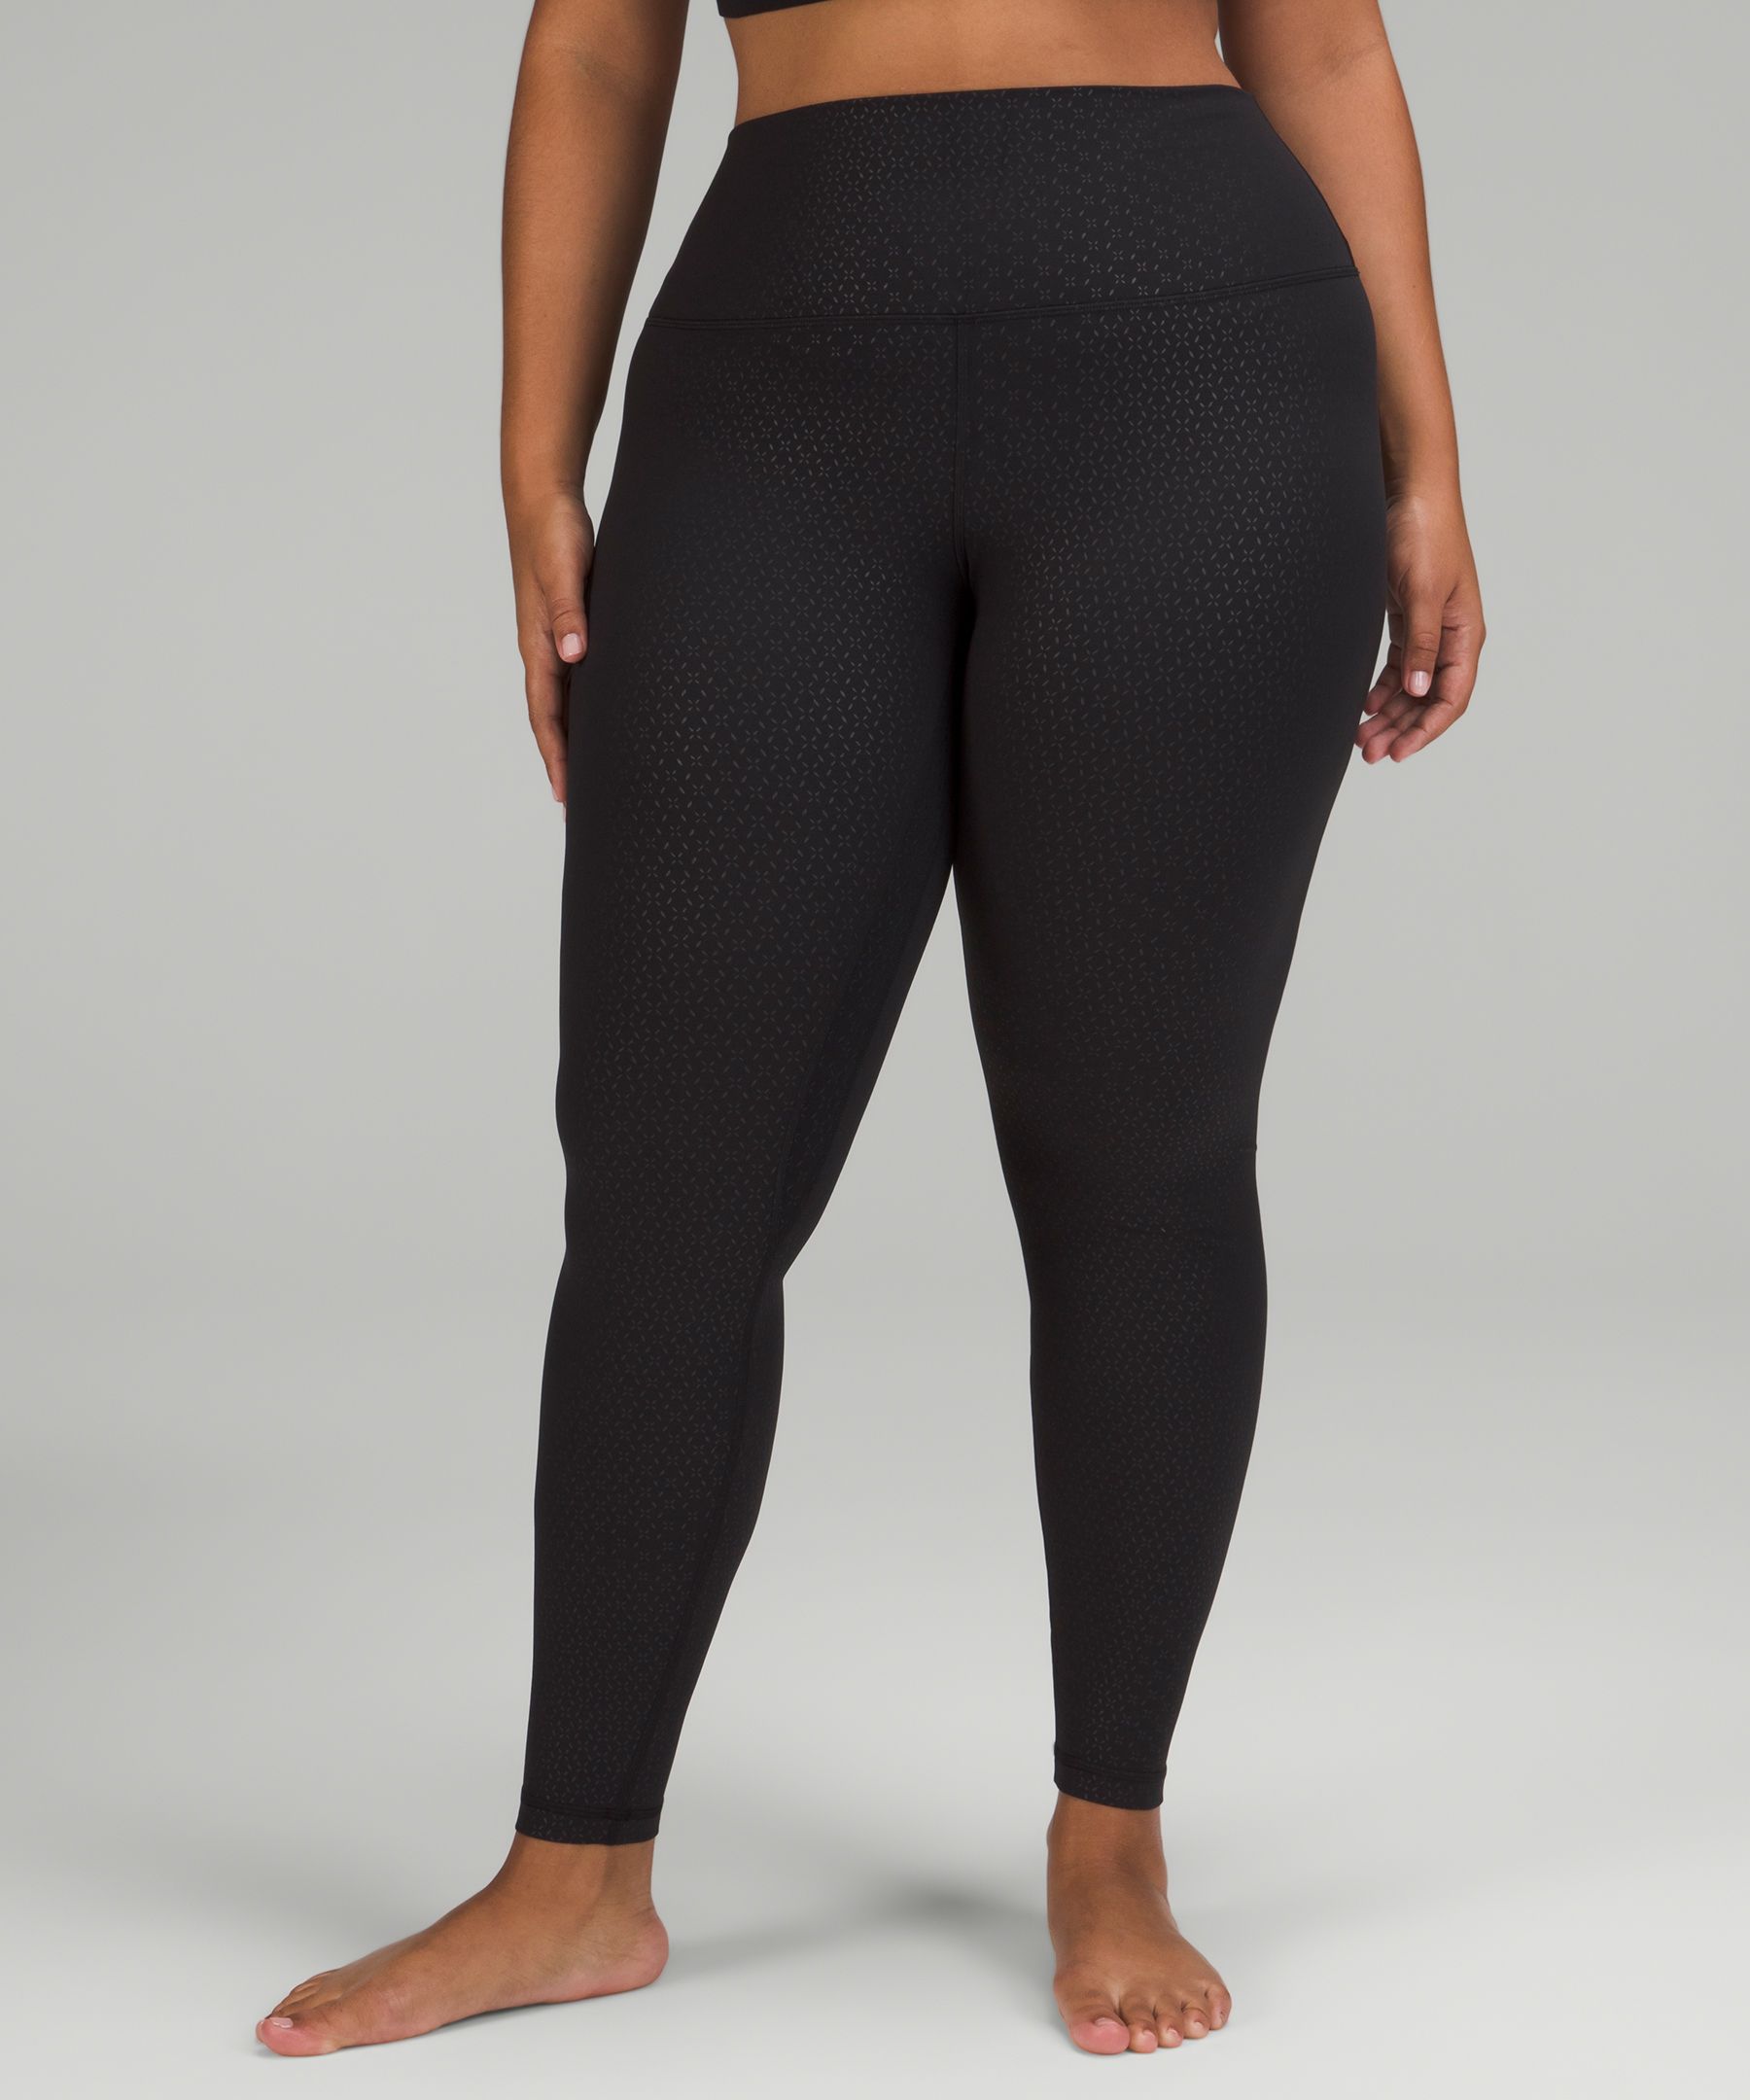 Lululemon Align High-Rise Pants 28' Pink Size 6 - $60 (38% Off Retail) -  From Katlyn